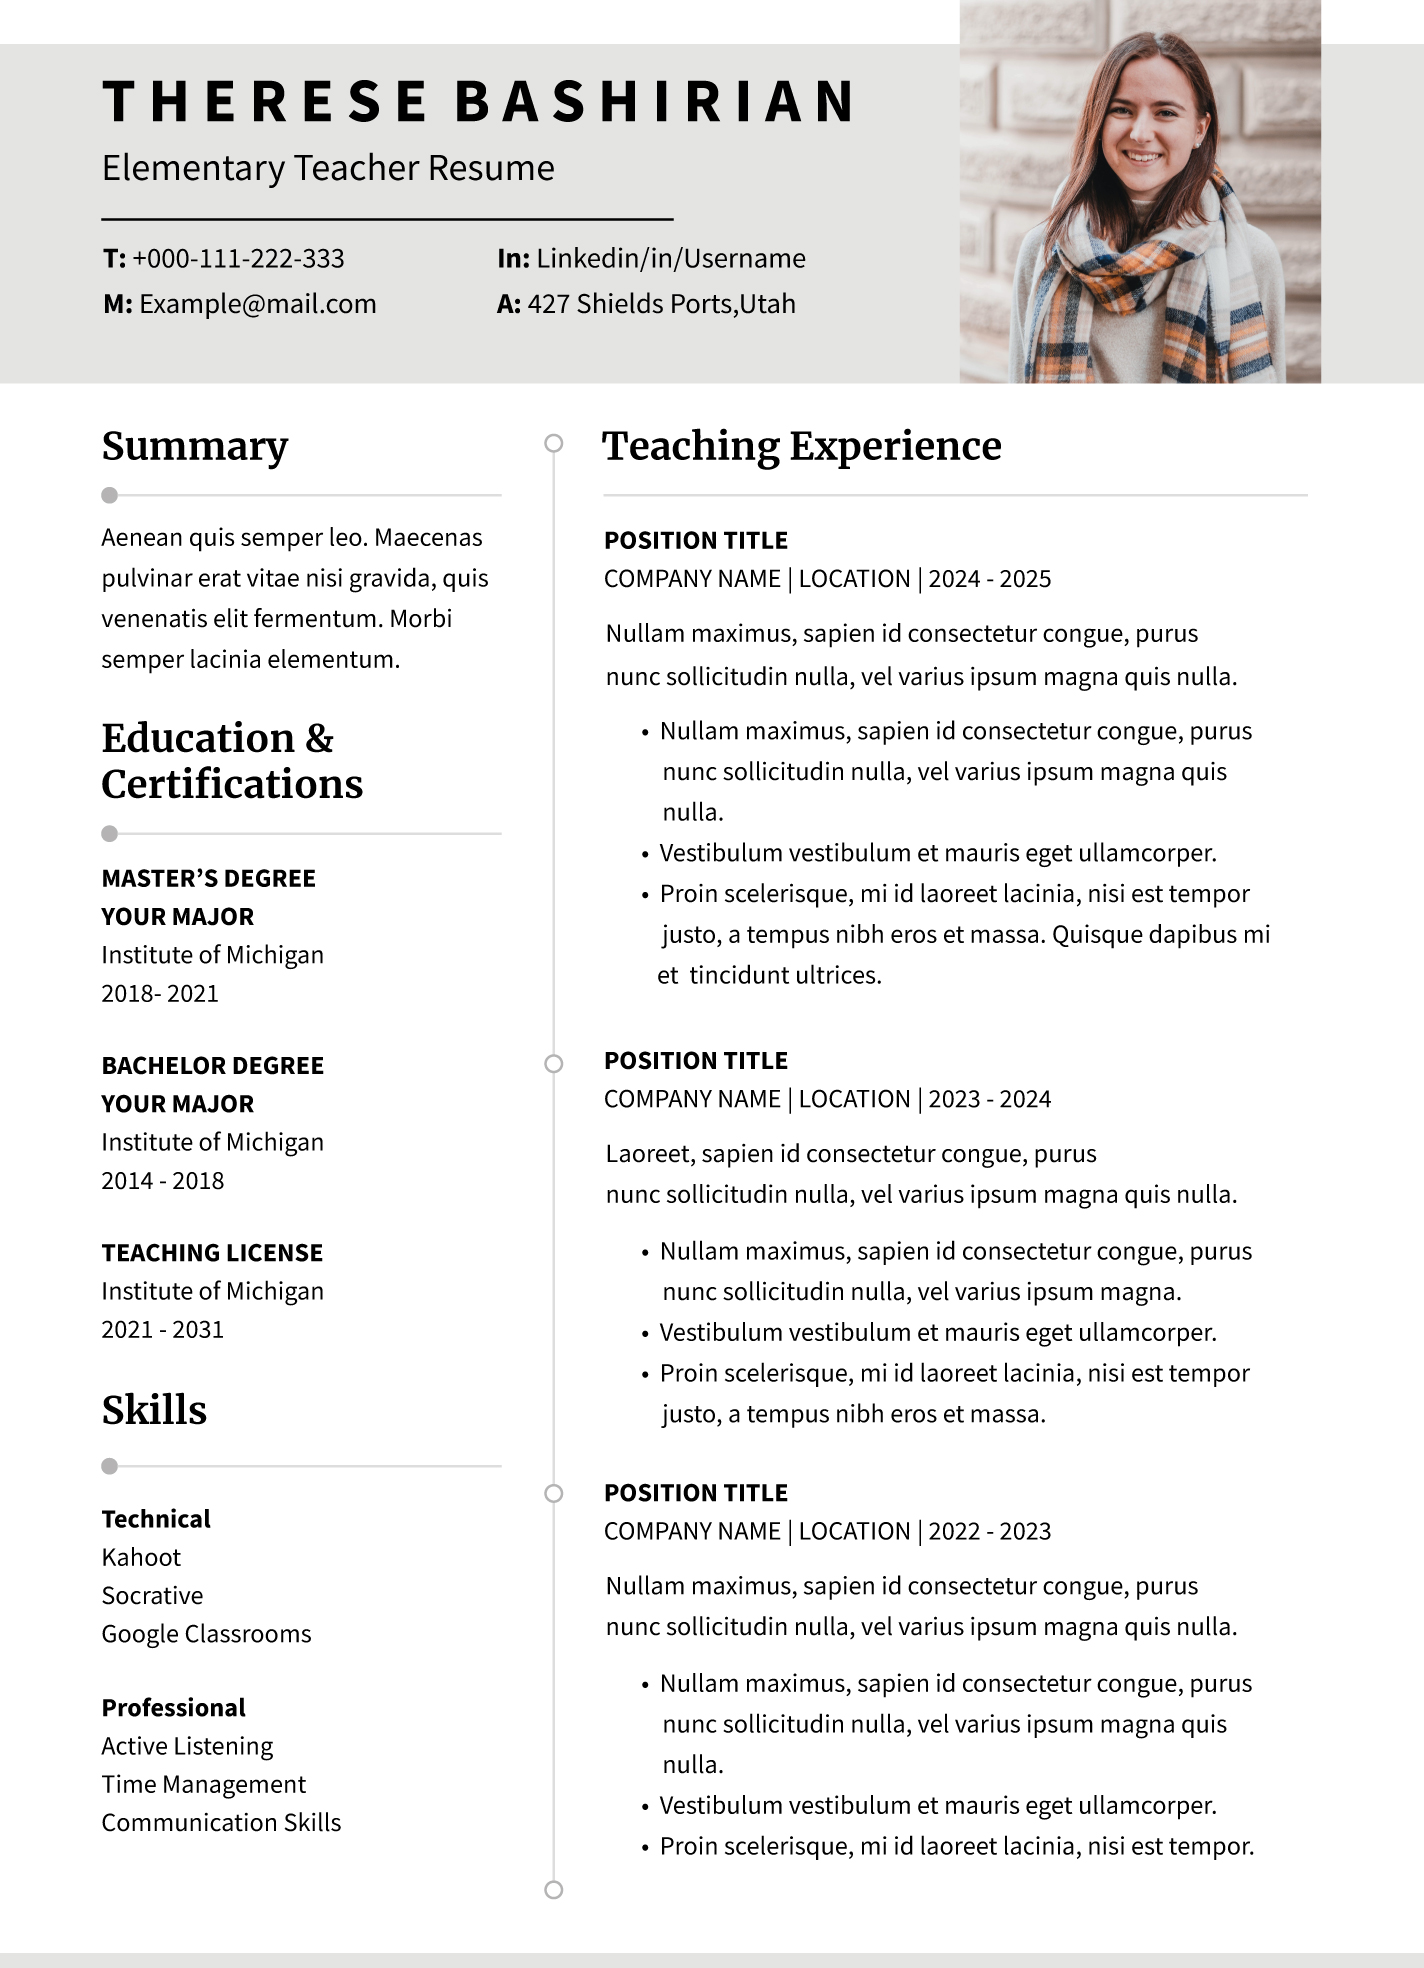 free administrative assistant resume templates